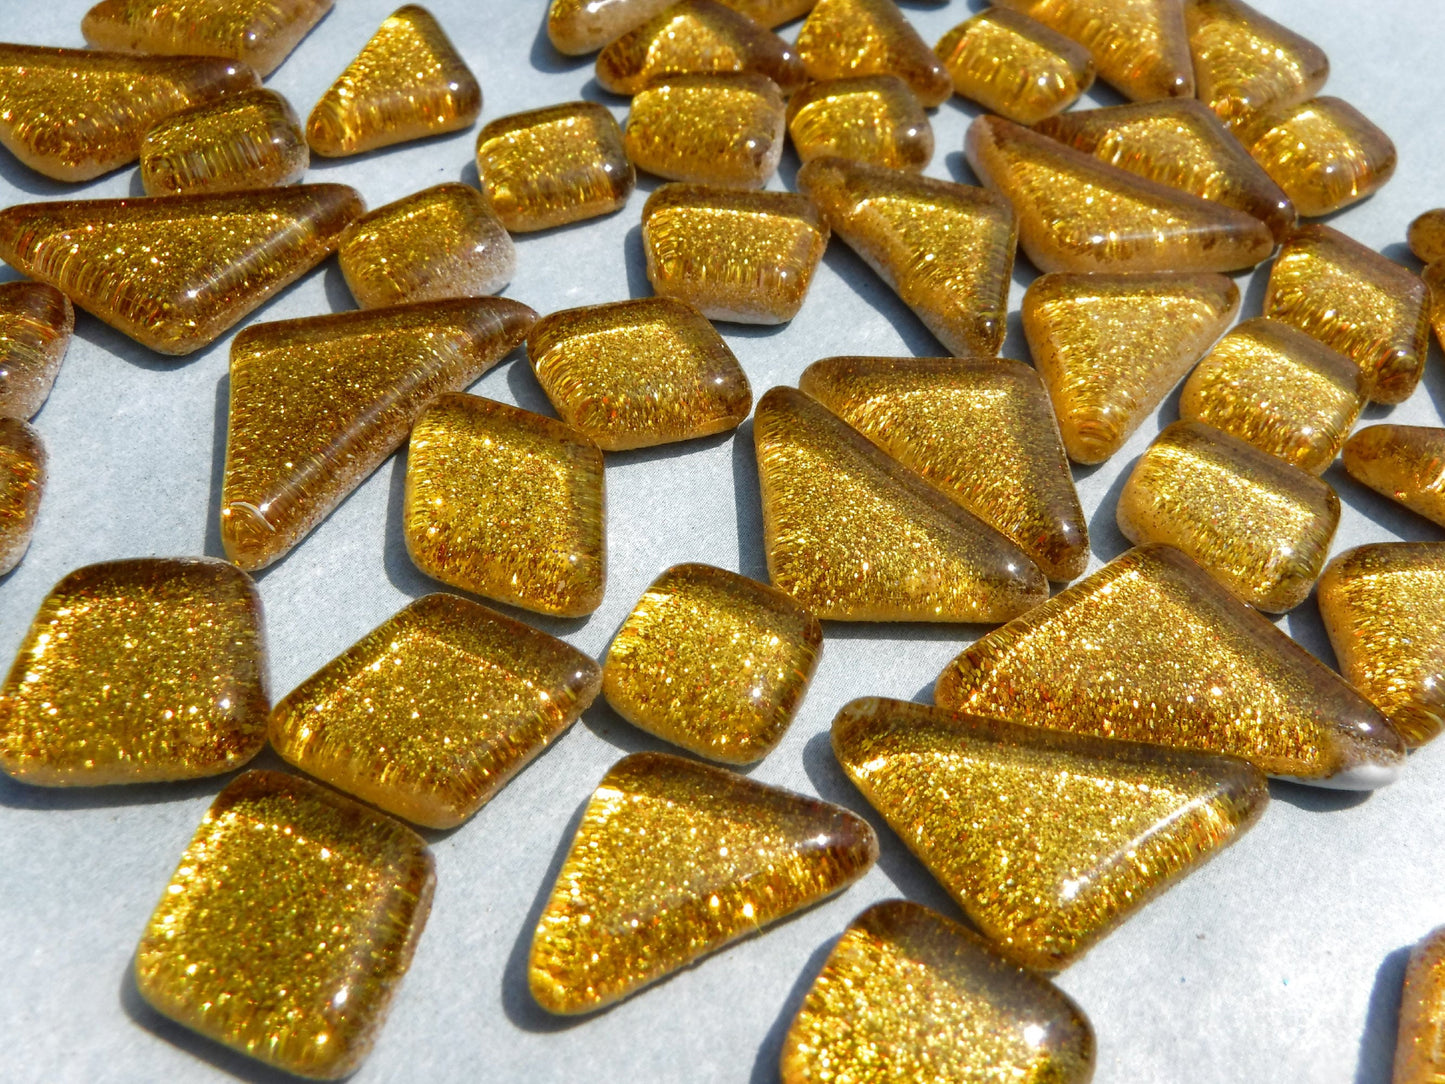 Gold Glitter Puzzle Tiles - 100 grams in Assorted Shapes Glass Mosaic Tiles